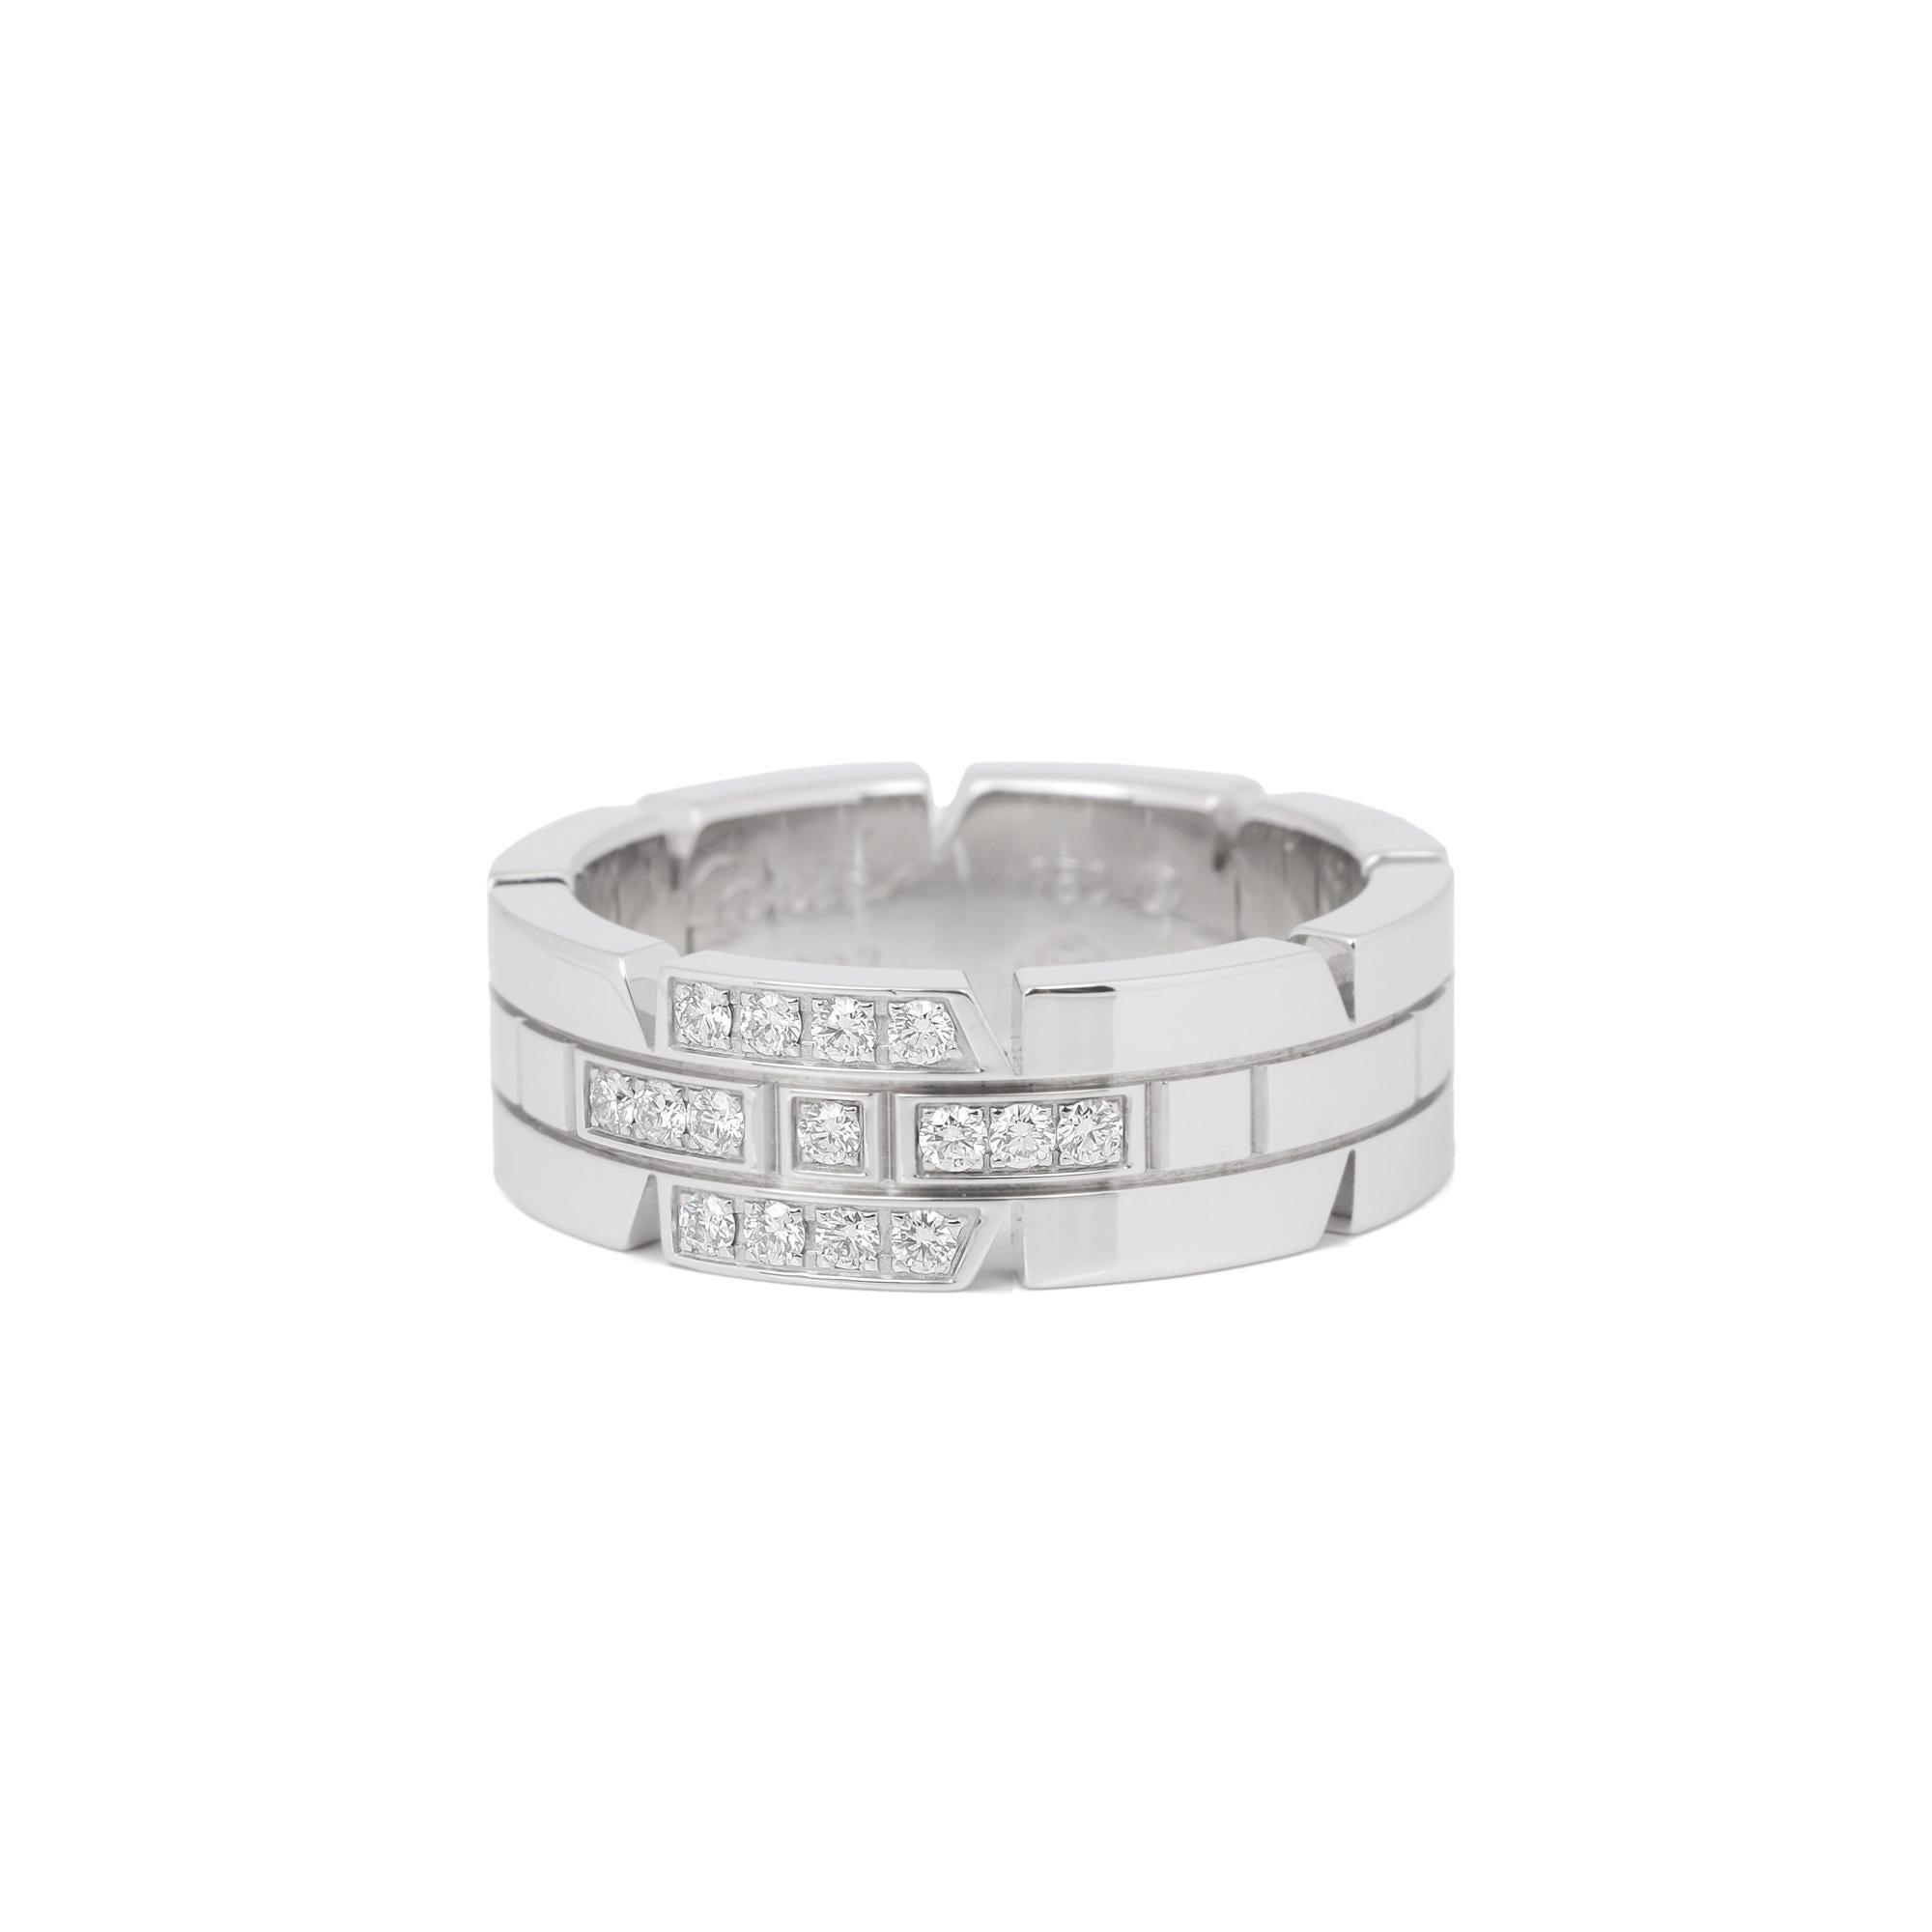 Cartier Diamond Accent 18ct White Gold Tank Française Ring

Brand Cartier
Model Tank Française Ring
Product Type Ring
Serial Number 19***
Age Circa 2008
Accompanied By Cartier Box, Certificate
Material(s) 18ct White Gold
Gemstone Diamond
UK Ring